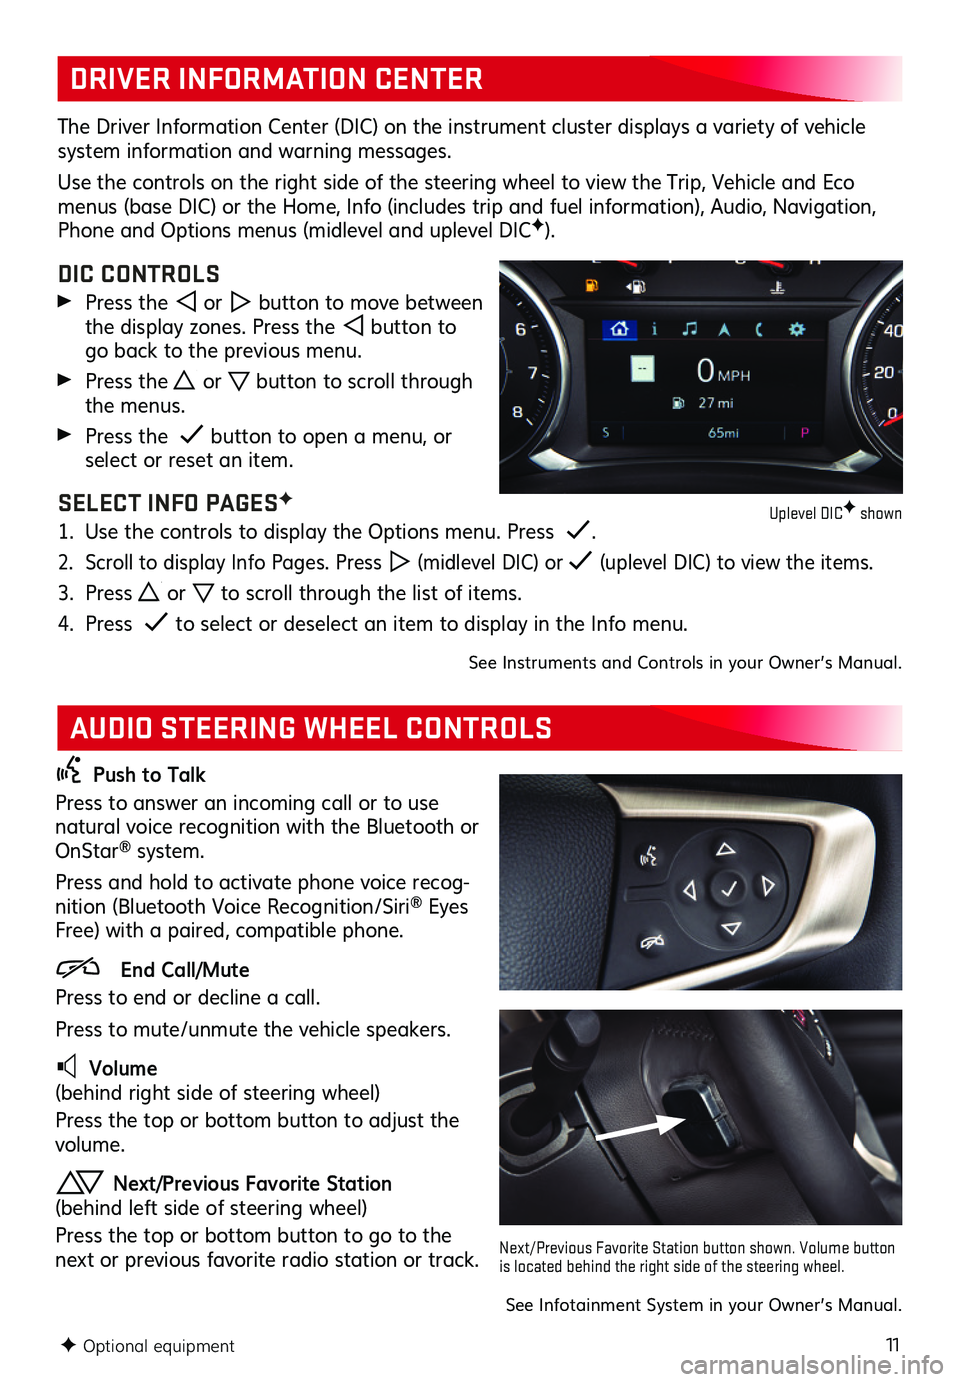 GMC TERRAIN 2021  Get To Know Guide 11
DRIVER INFORMATION CENTER
AUDIO STEERING WHEEL CONTROLS
The Driver Information Center (DIC) on the instrument cluster displays a variety of vehicle system information and warning messages. 
Use the